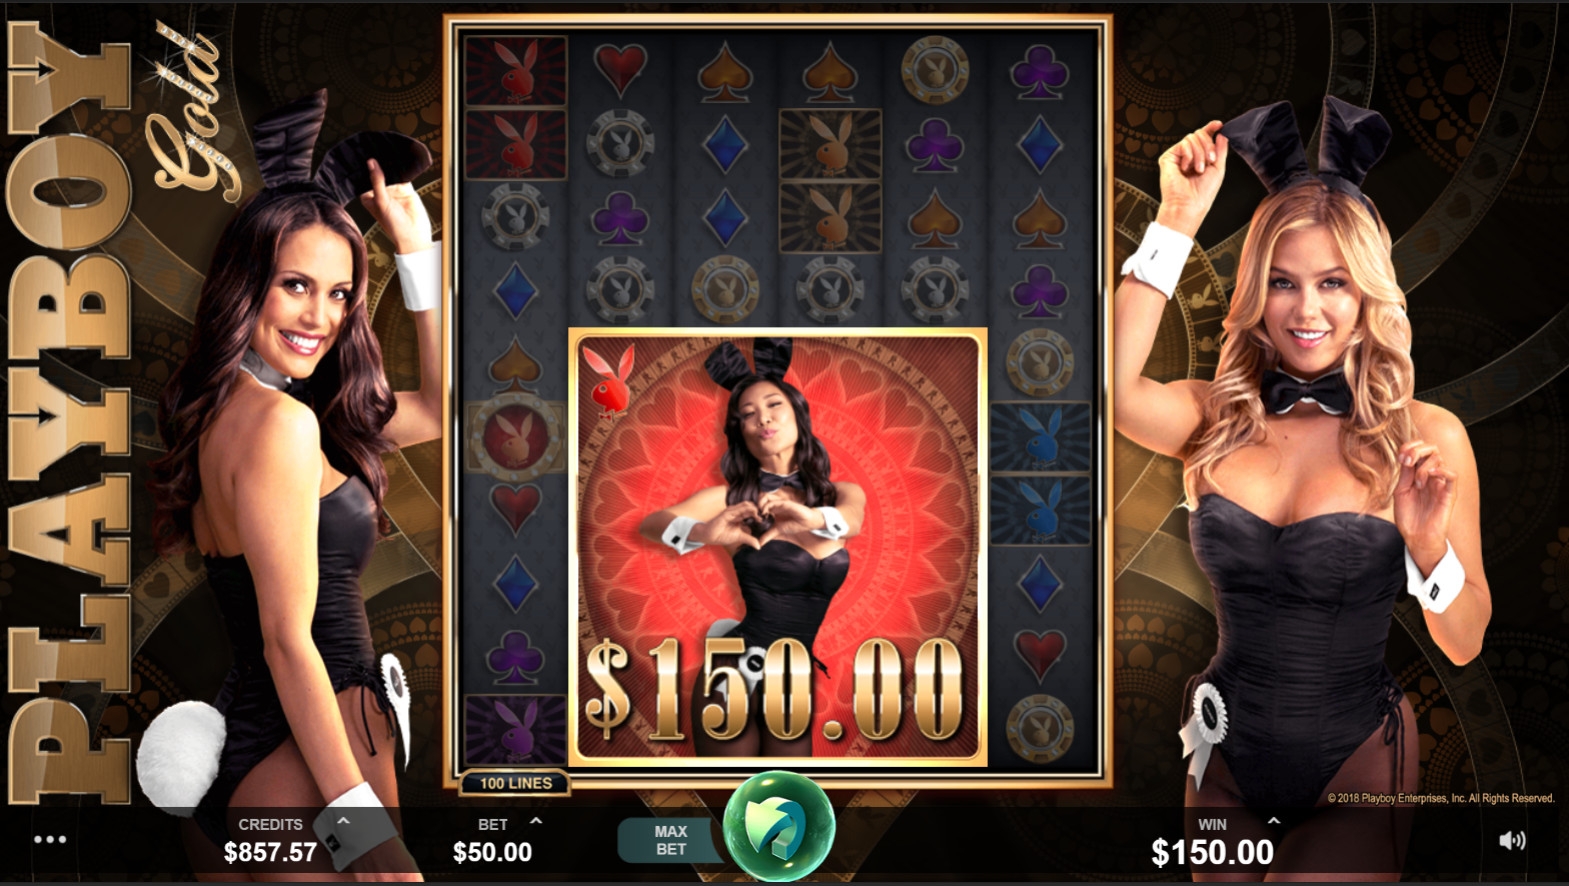 Playboy Gold (Playboy Gold) from category Slots